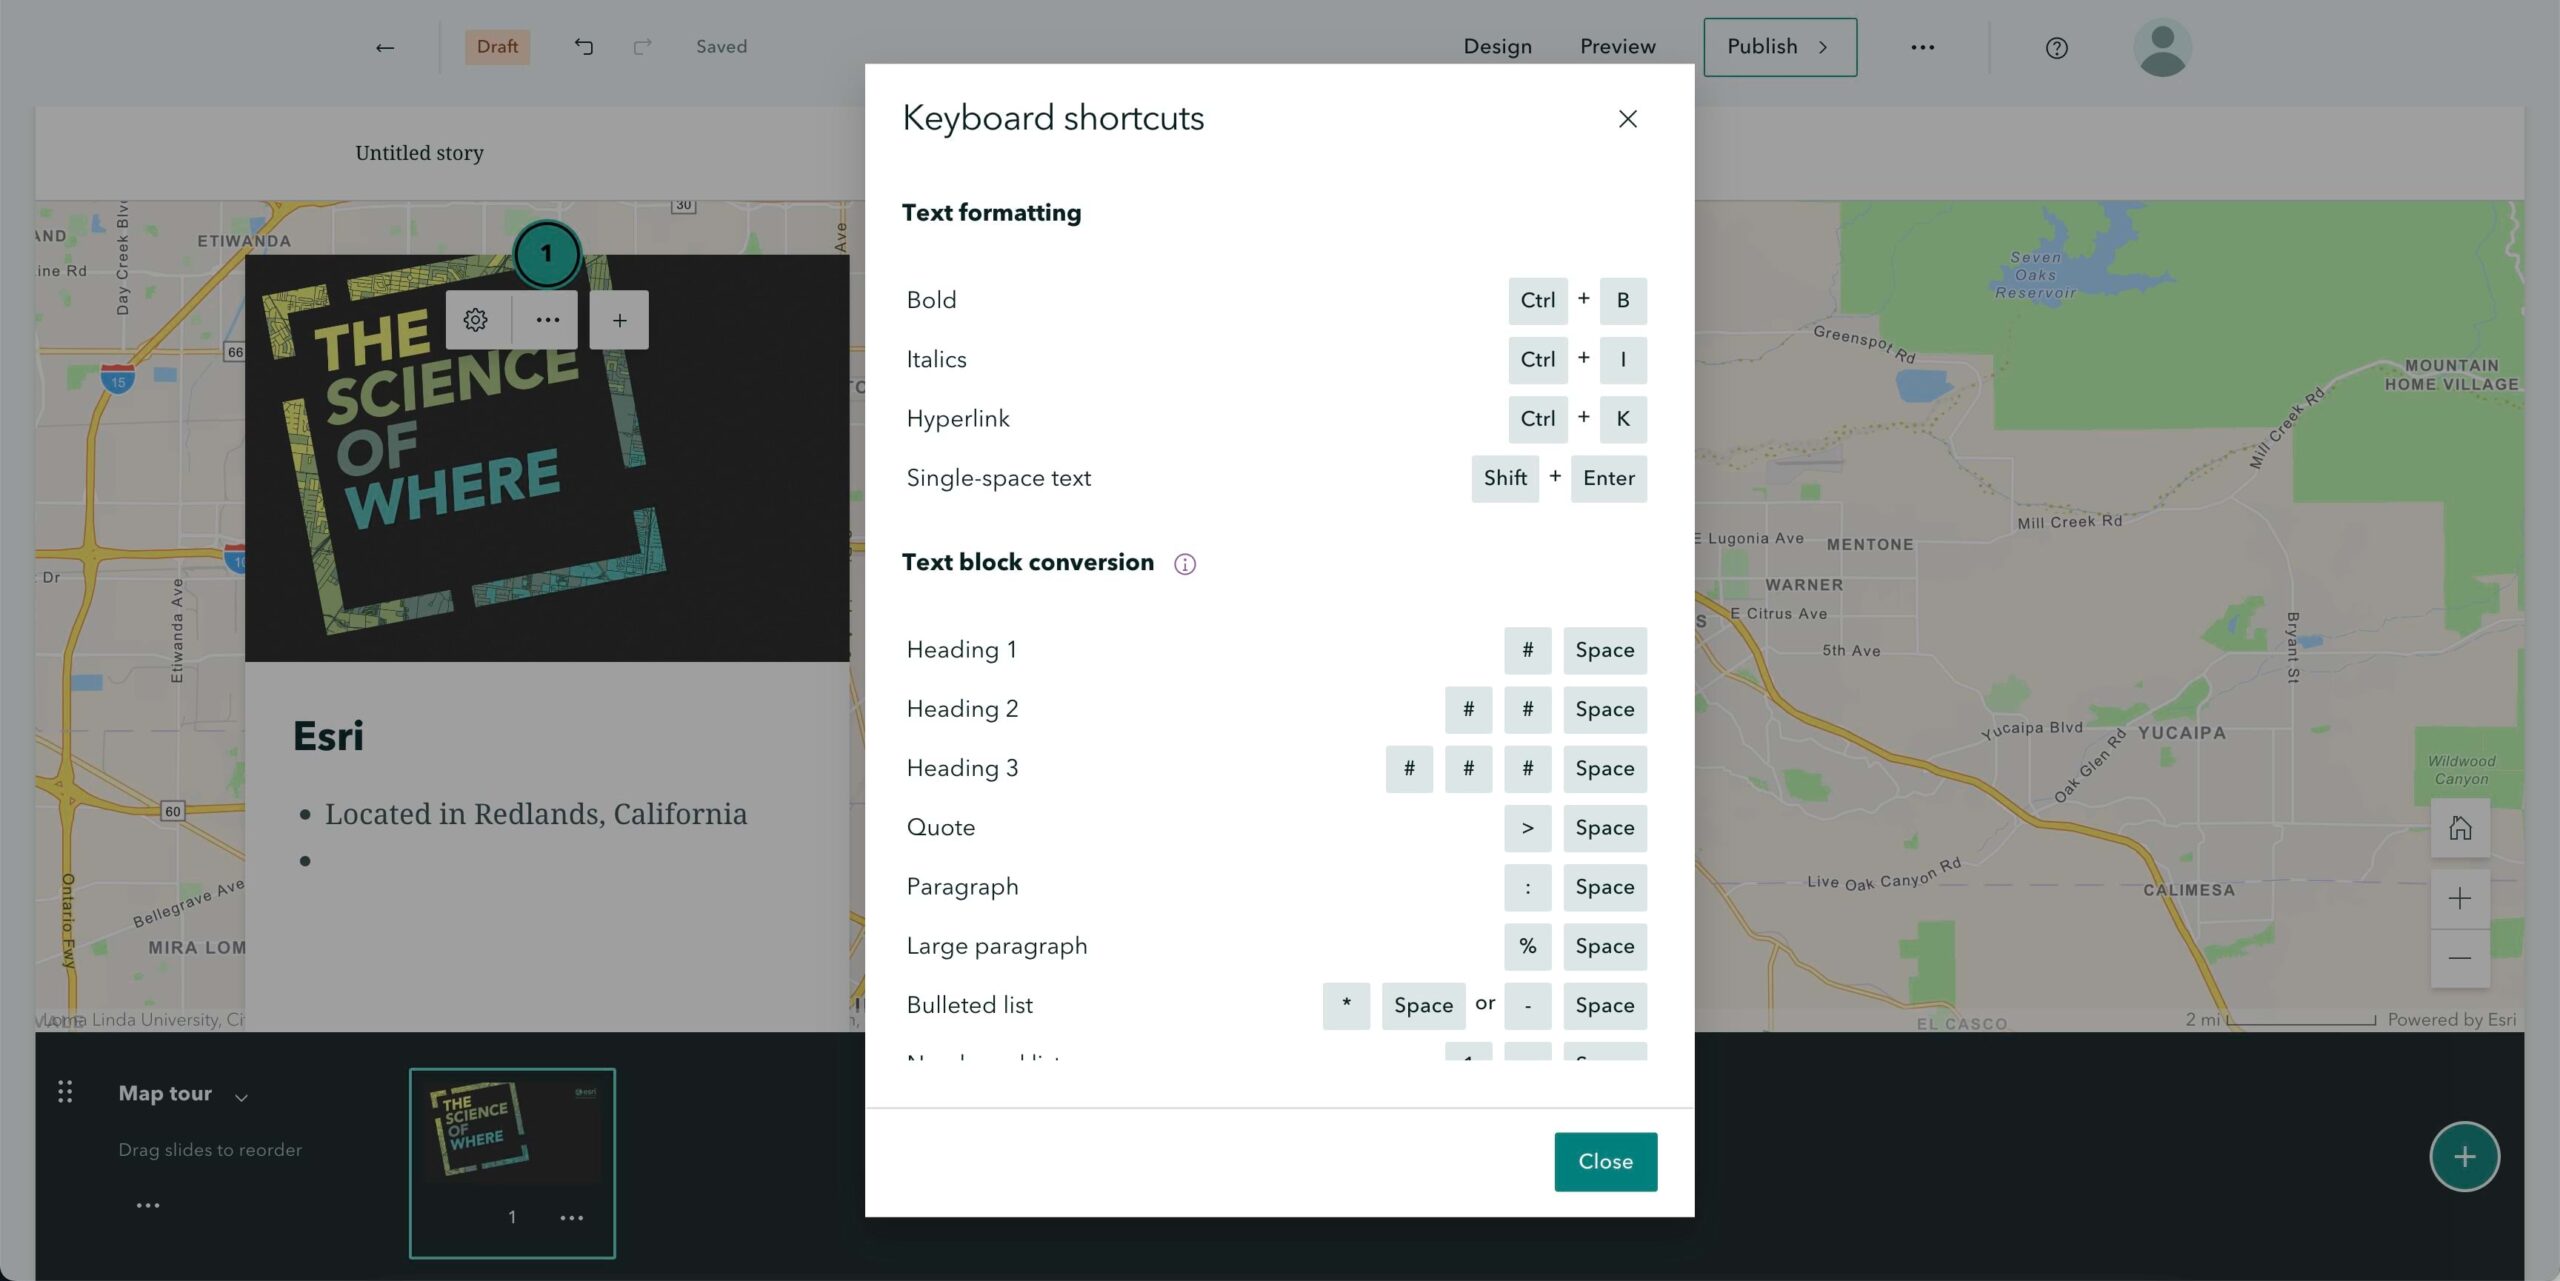 The keyboard shortcuts to help you format map tours are shown in the ArcGIS StoryMaps builder.